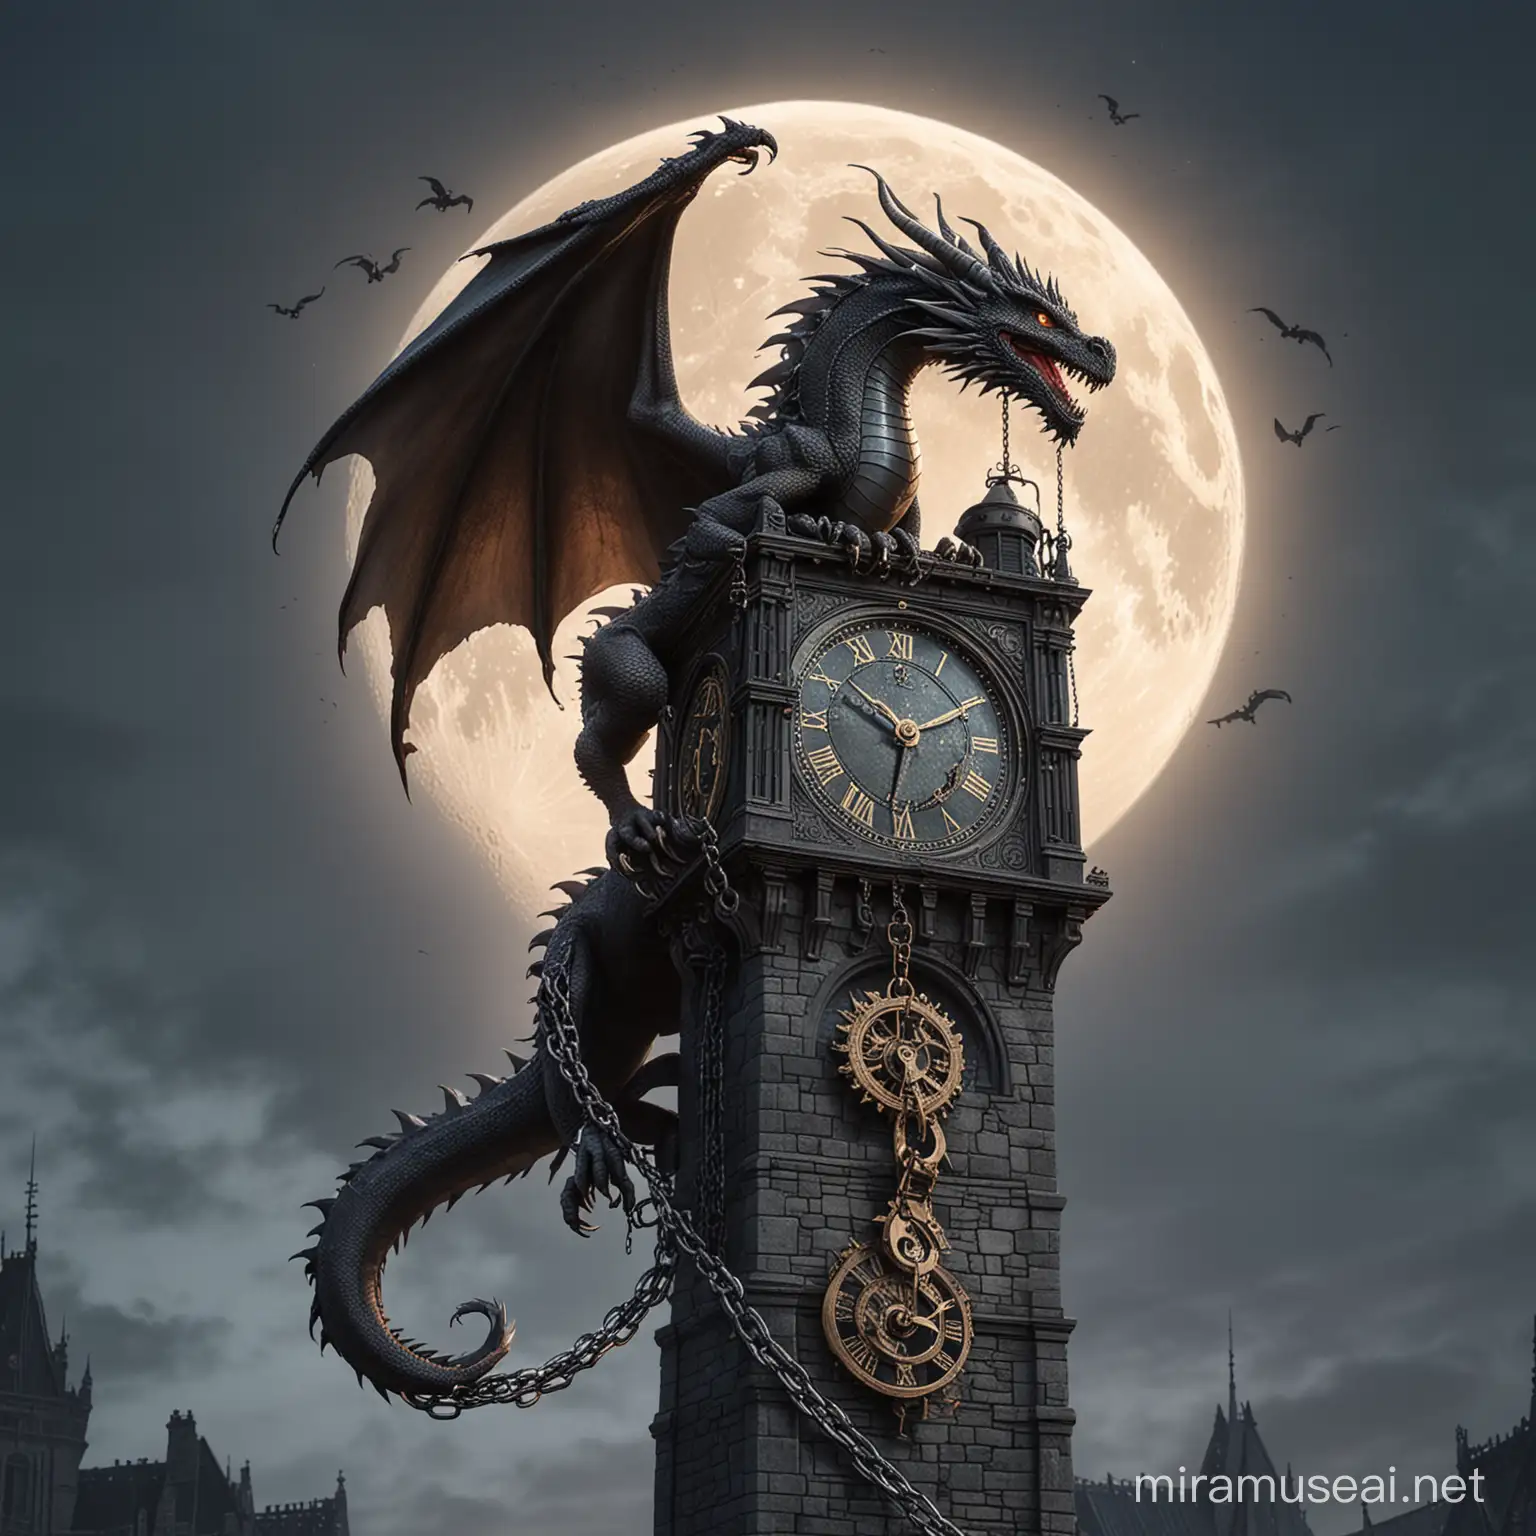 Dragon climbing clock tower with broken chains on paws and moon on the background